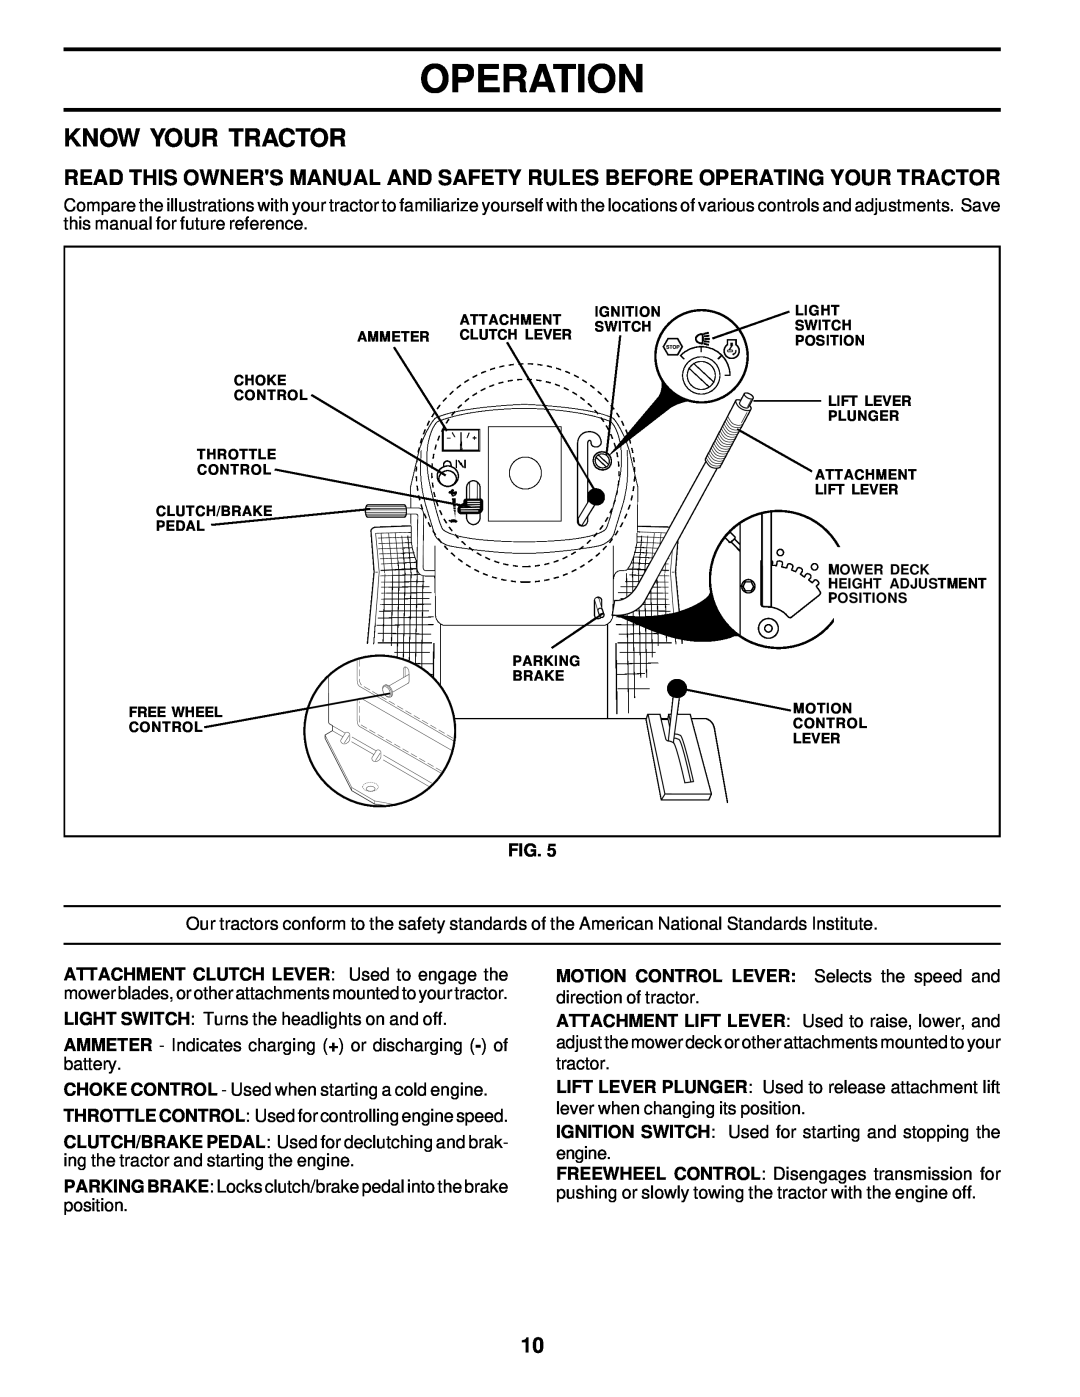 Poulan 177552 owner manual Know Your Tractor, Operation 